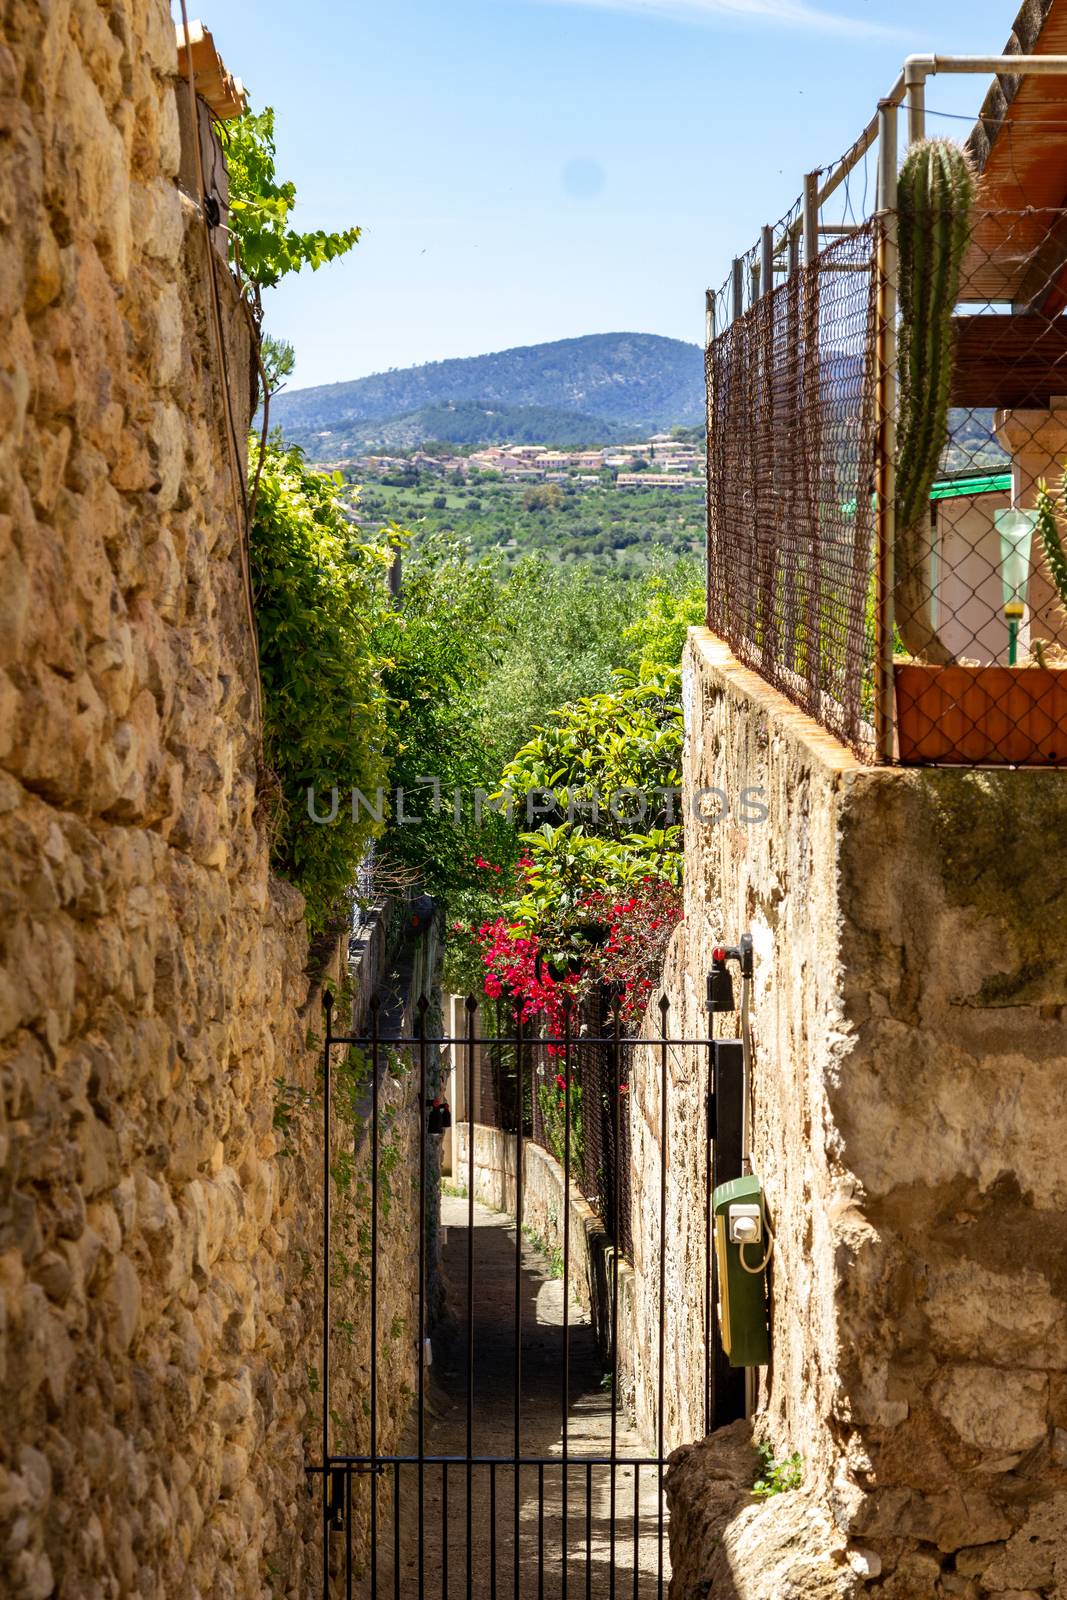 Small roads and houses in the village Campanet in the north of Mallorca